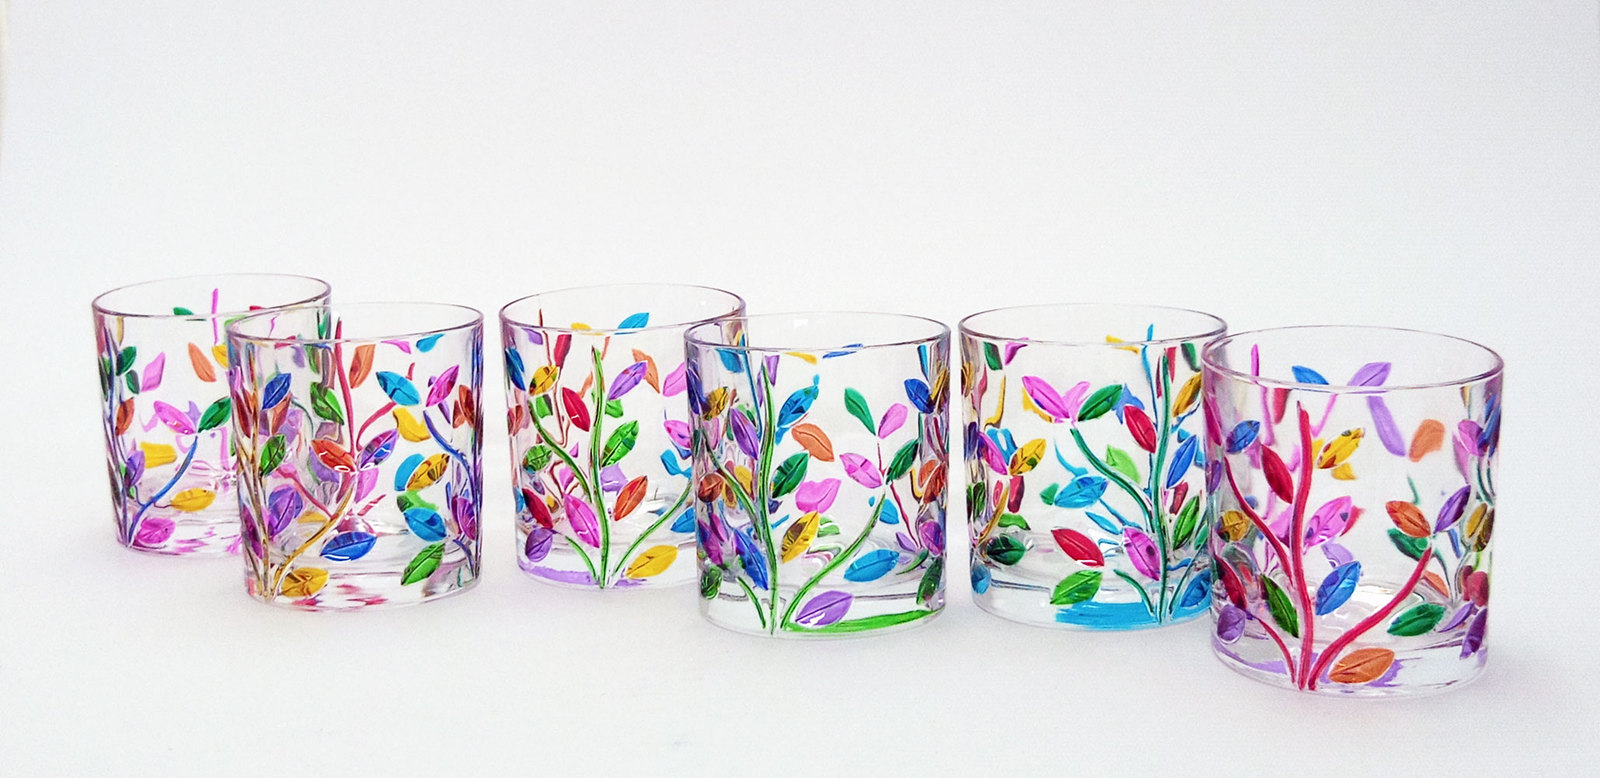 Laurus set 6 tumblers hand-painted  multicolor crystal glass Murano style Venice - $165.00